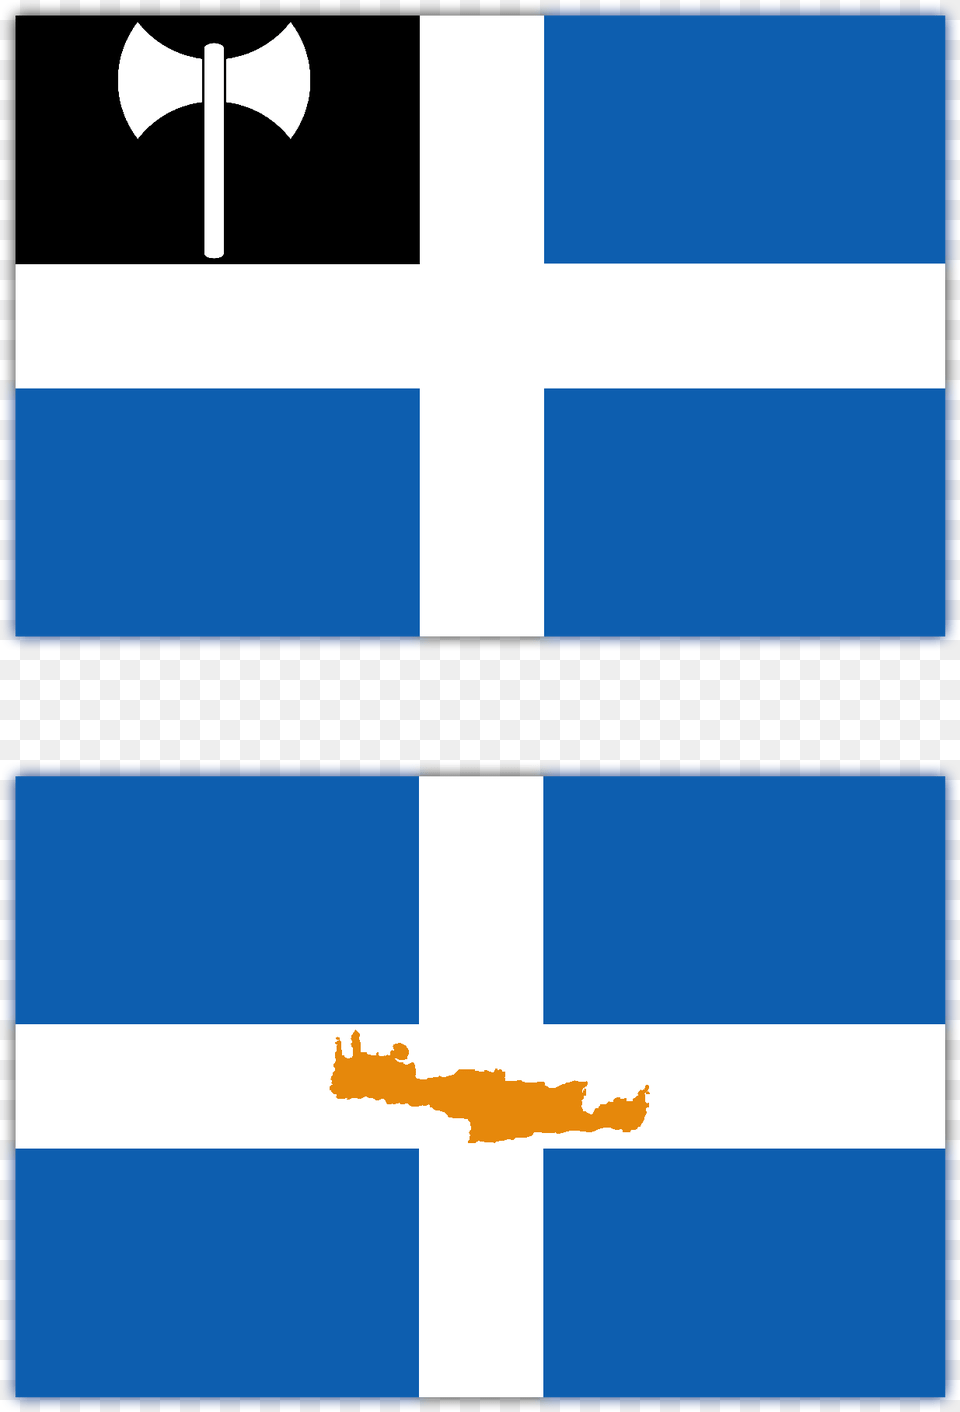 Unofficial Flags For The Island Cretegreece Flag Of Crete Png Image